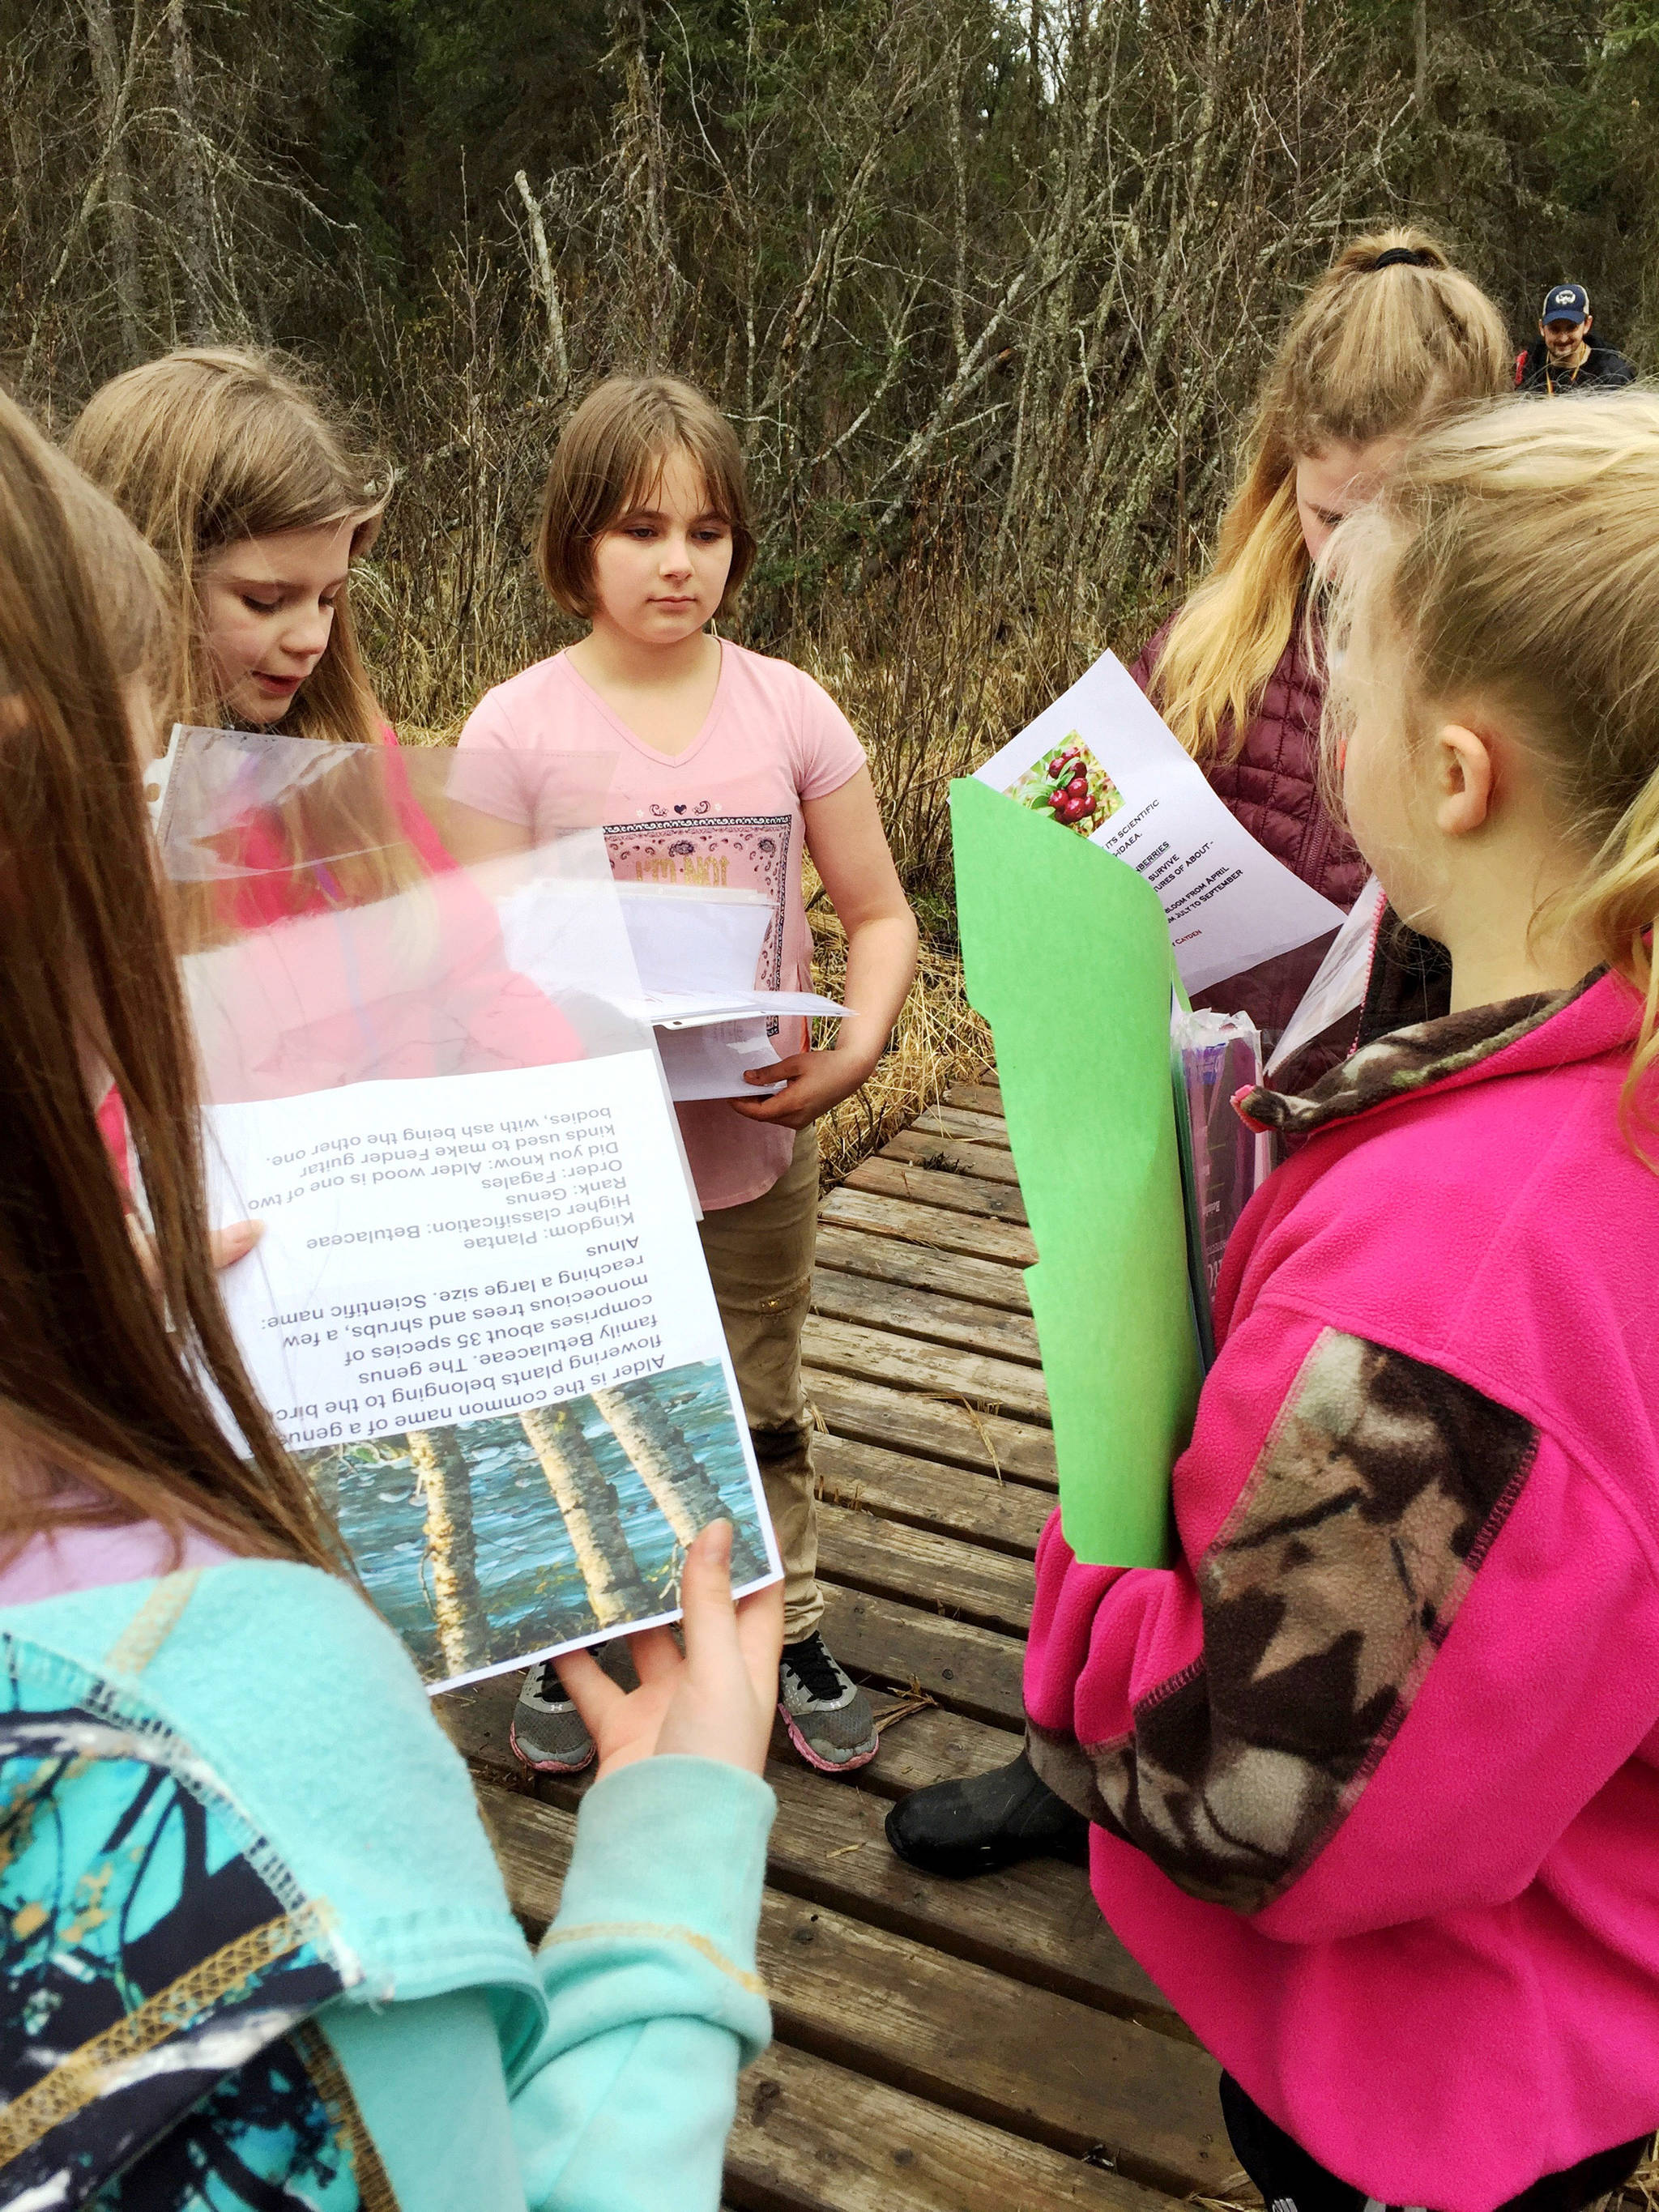 Kalifornsky Beach Elementary School fifth grade students Justyce Stockman (left), Kyrie Watson (center) Kennedy Marshal (second from right) and Alyssa McDonald (right) work together to assemble plant identification signs on a trail near the school on Friday, May 18, 2018 near Soldotna, Alaska. The class worked with the Kenai Watershed Forum this year to improve the trail and place plant identification signs along it. (Photo by Elizabeth Earl/Peninsula Clarion)